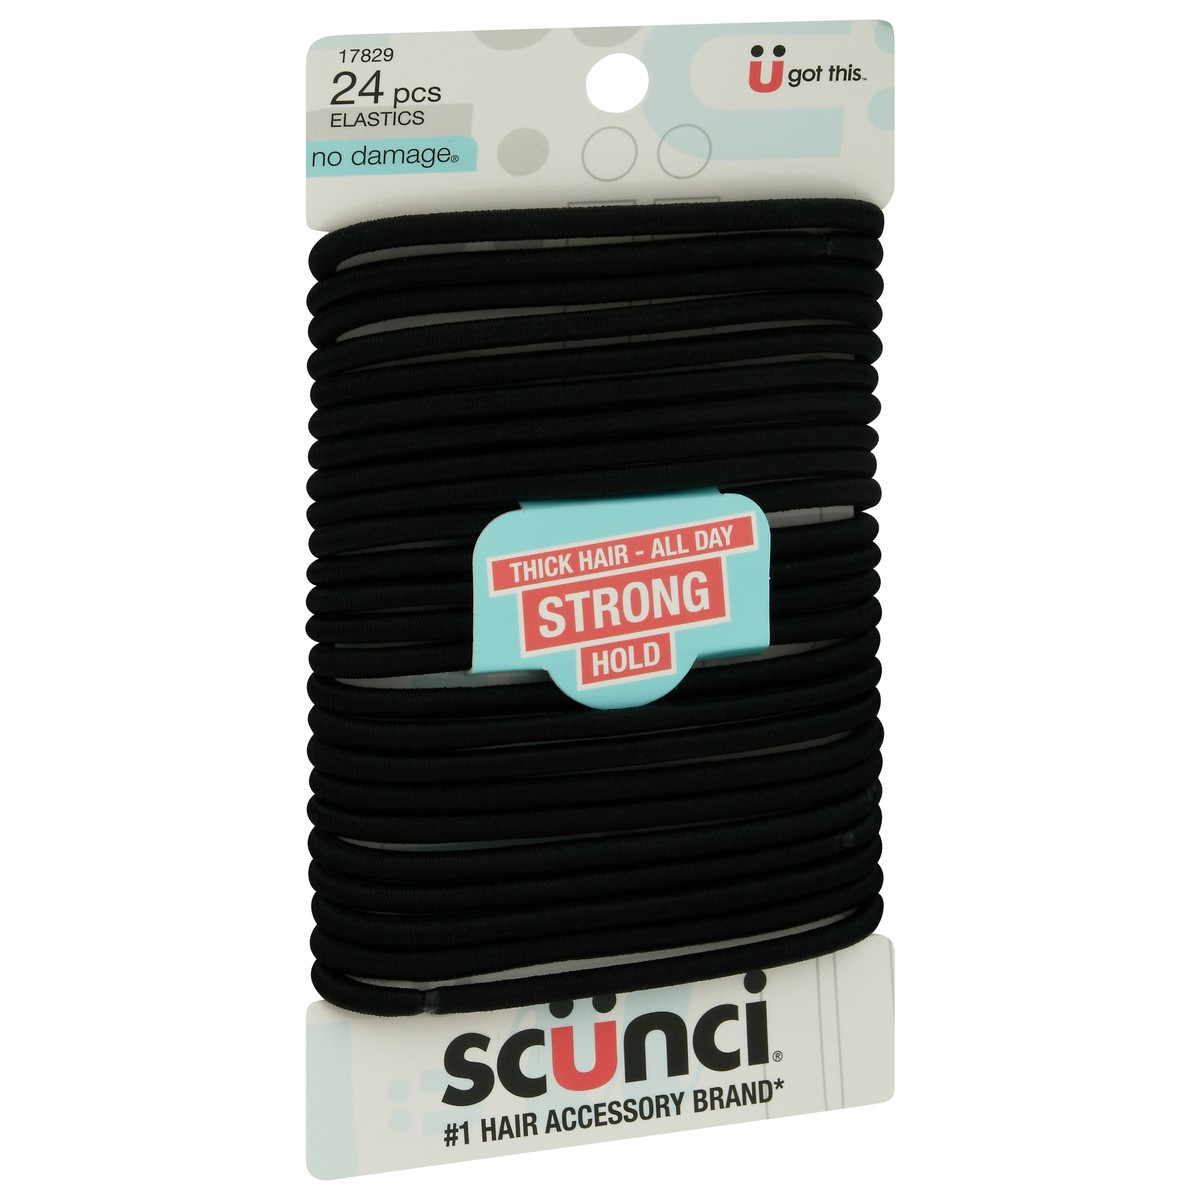 slide 2 of 9, scünci No Damage Thick Hair - All Day Strong Hold Elastics 24 ea, 24 ct